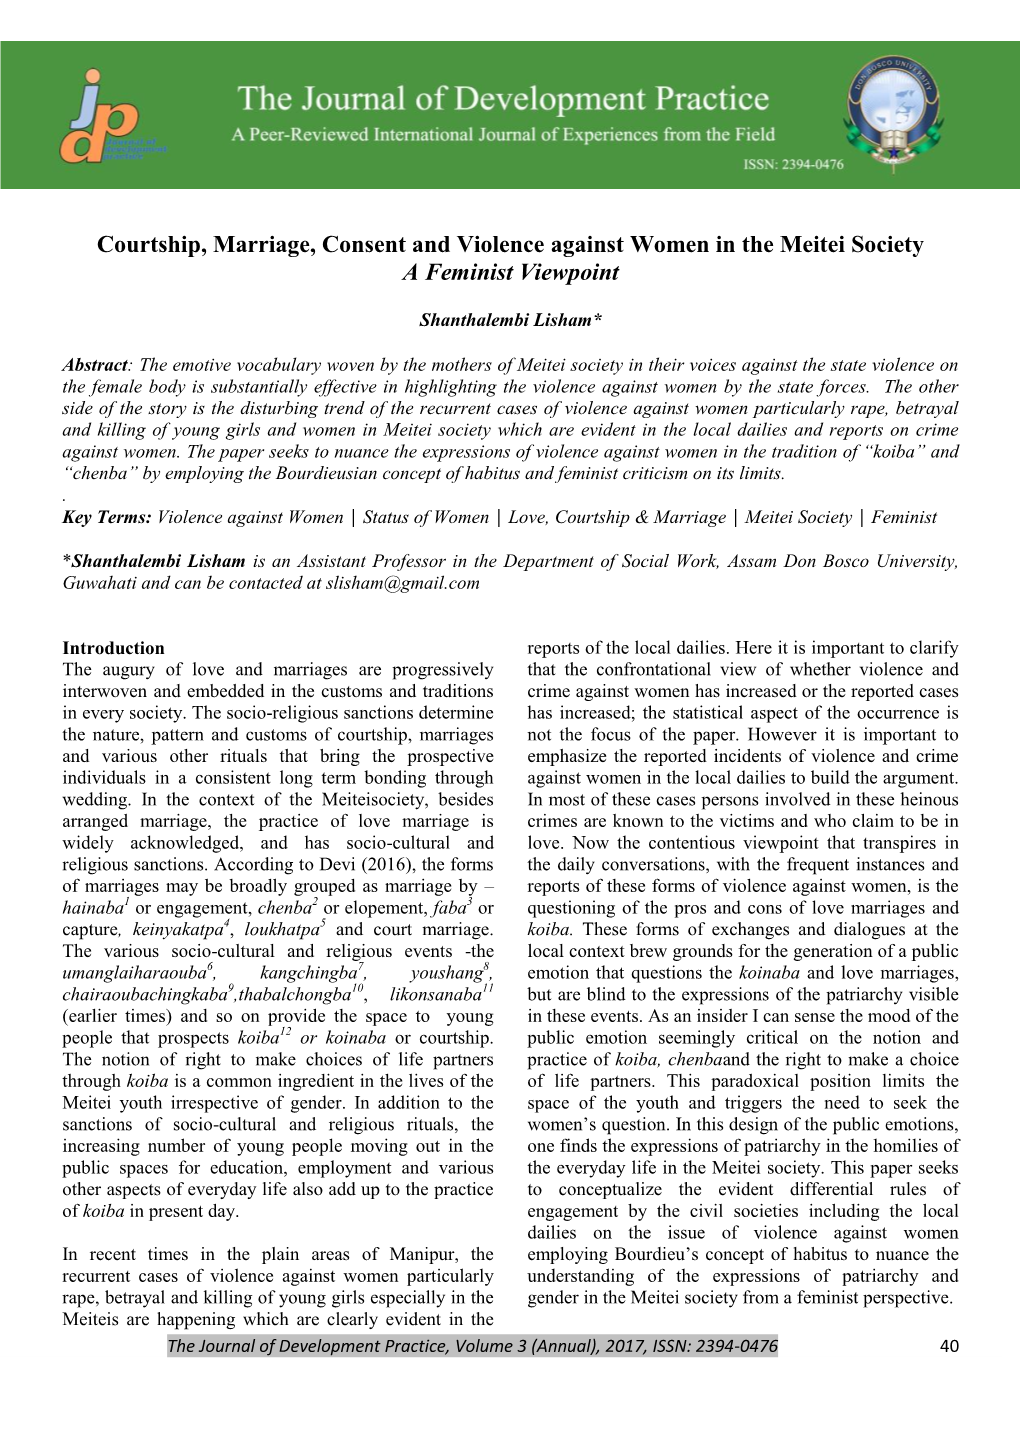 Courtship, Marriage, Consent and Violence Against Women in the Meitei Society a Feminist Viewpoint